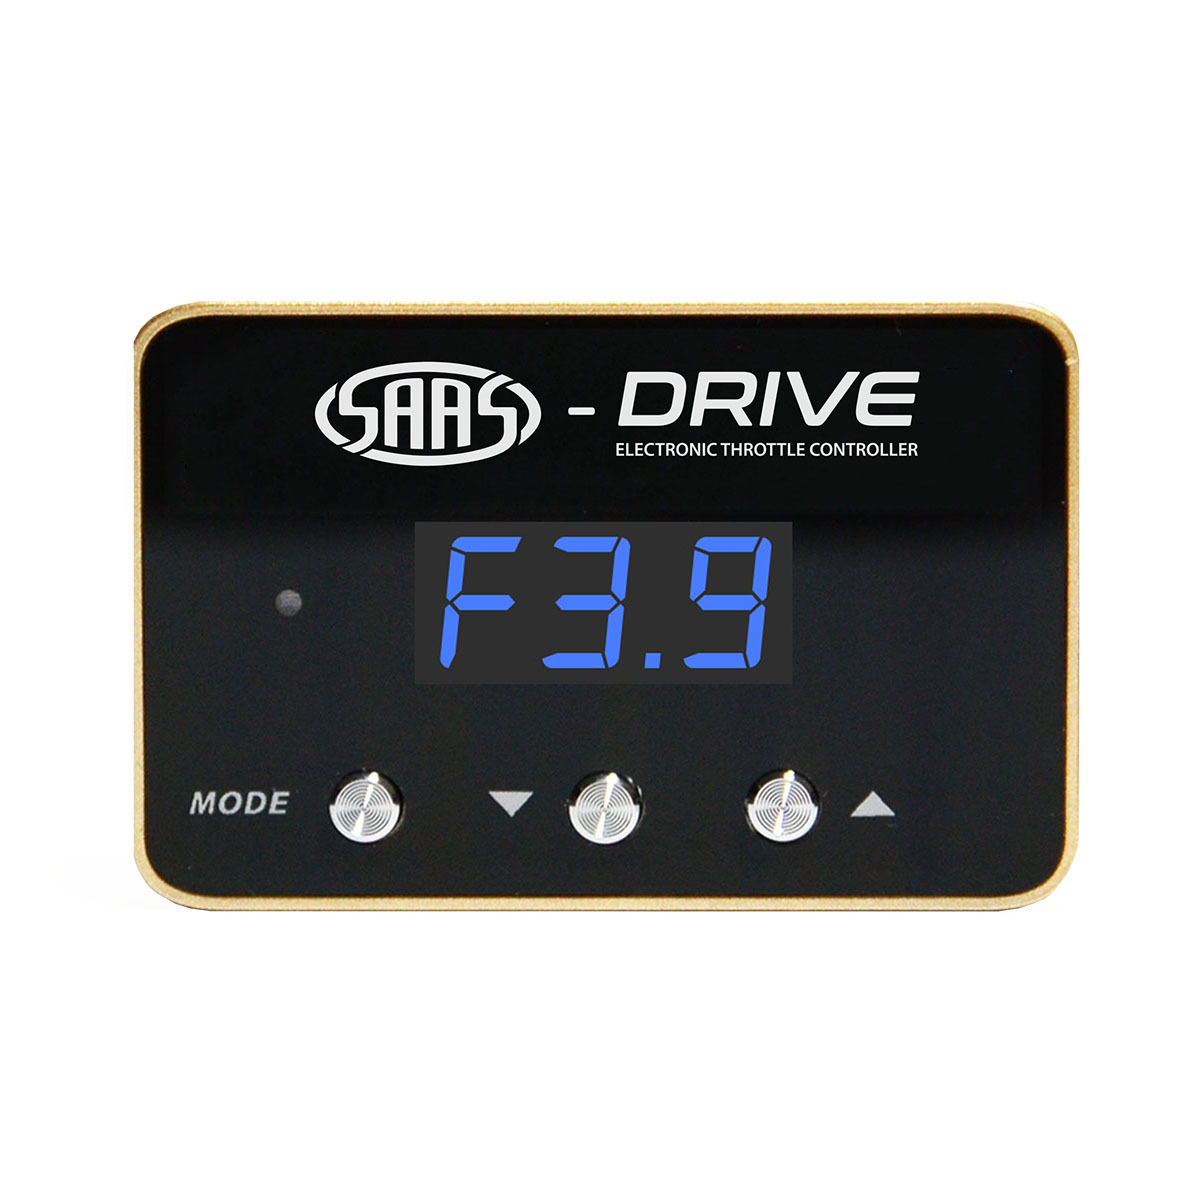 SAAS-Drive Dongfeng Joyear Throttle Controller 